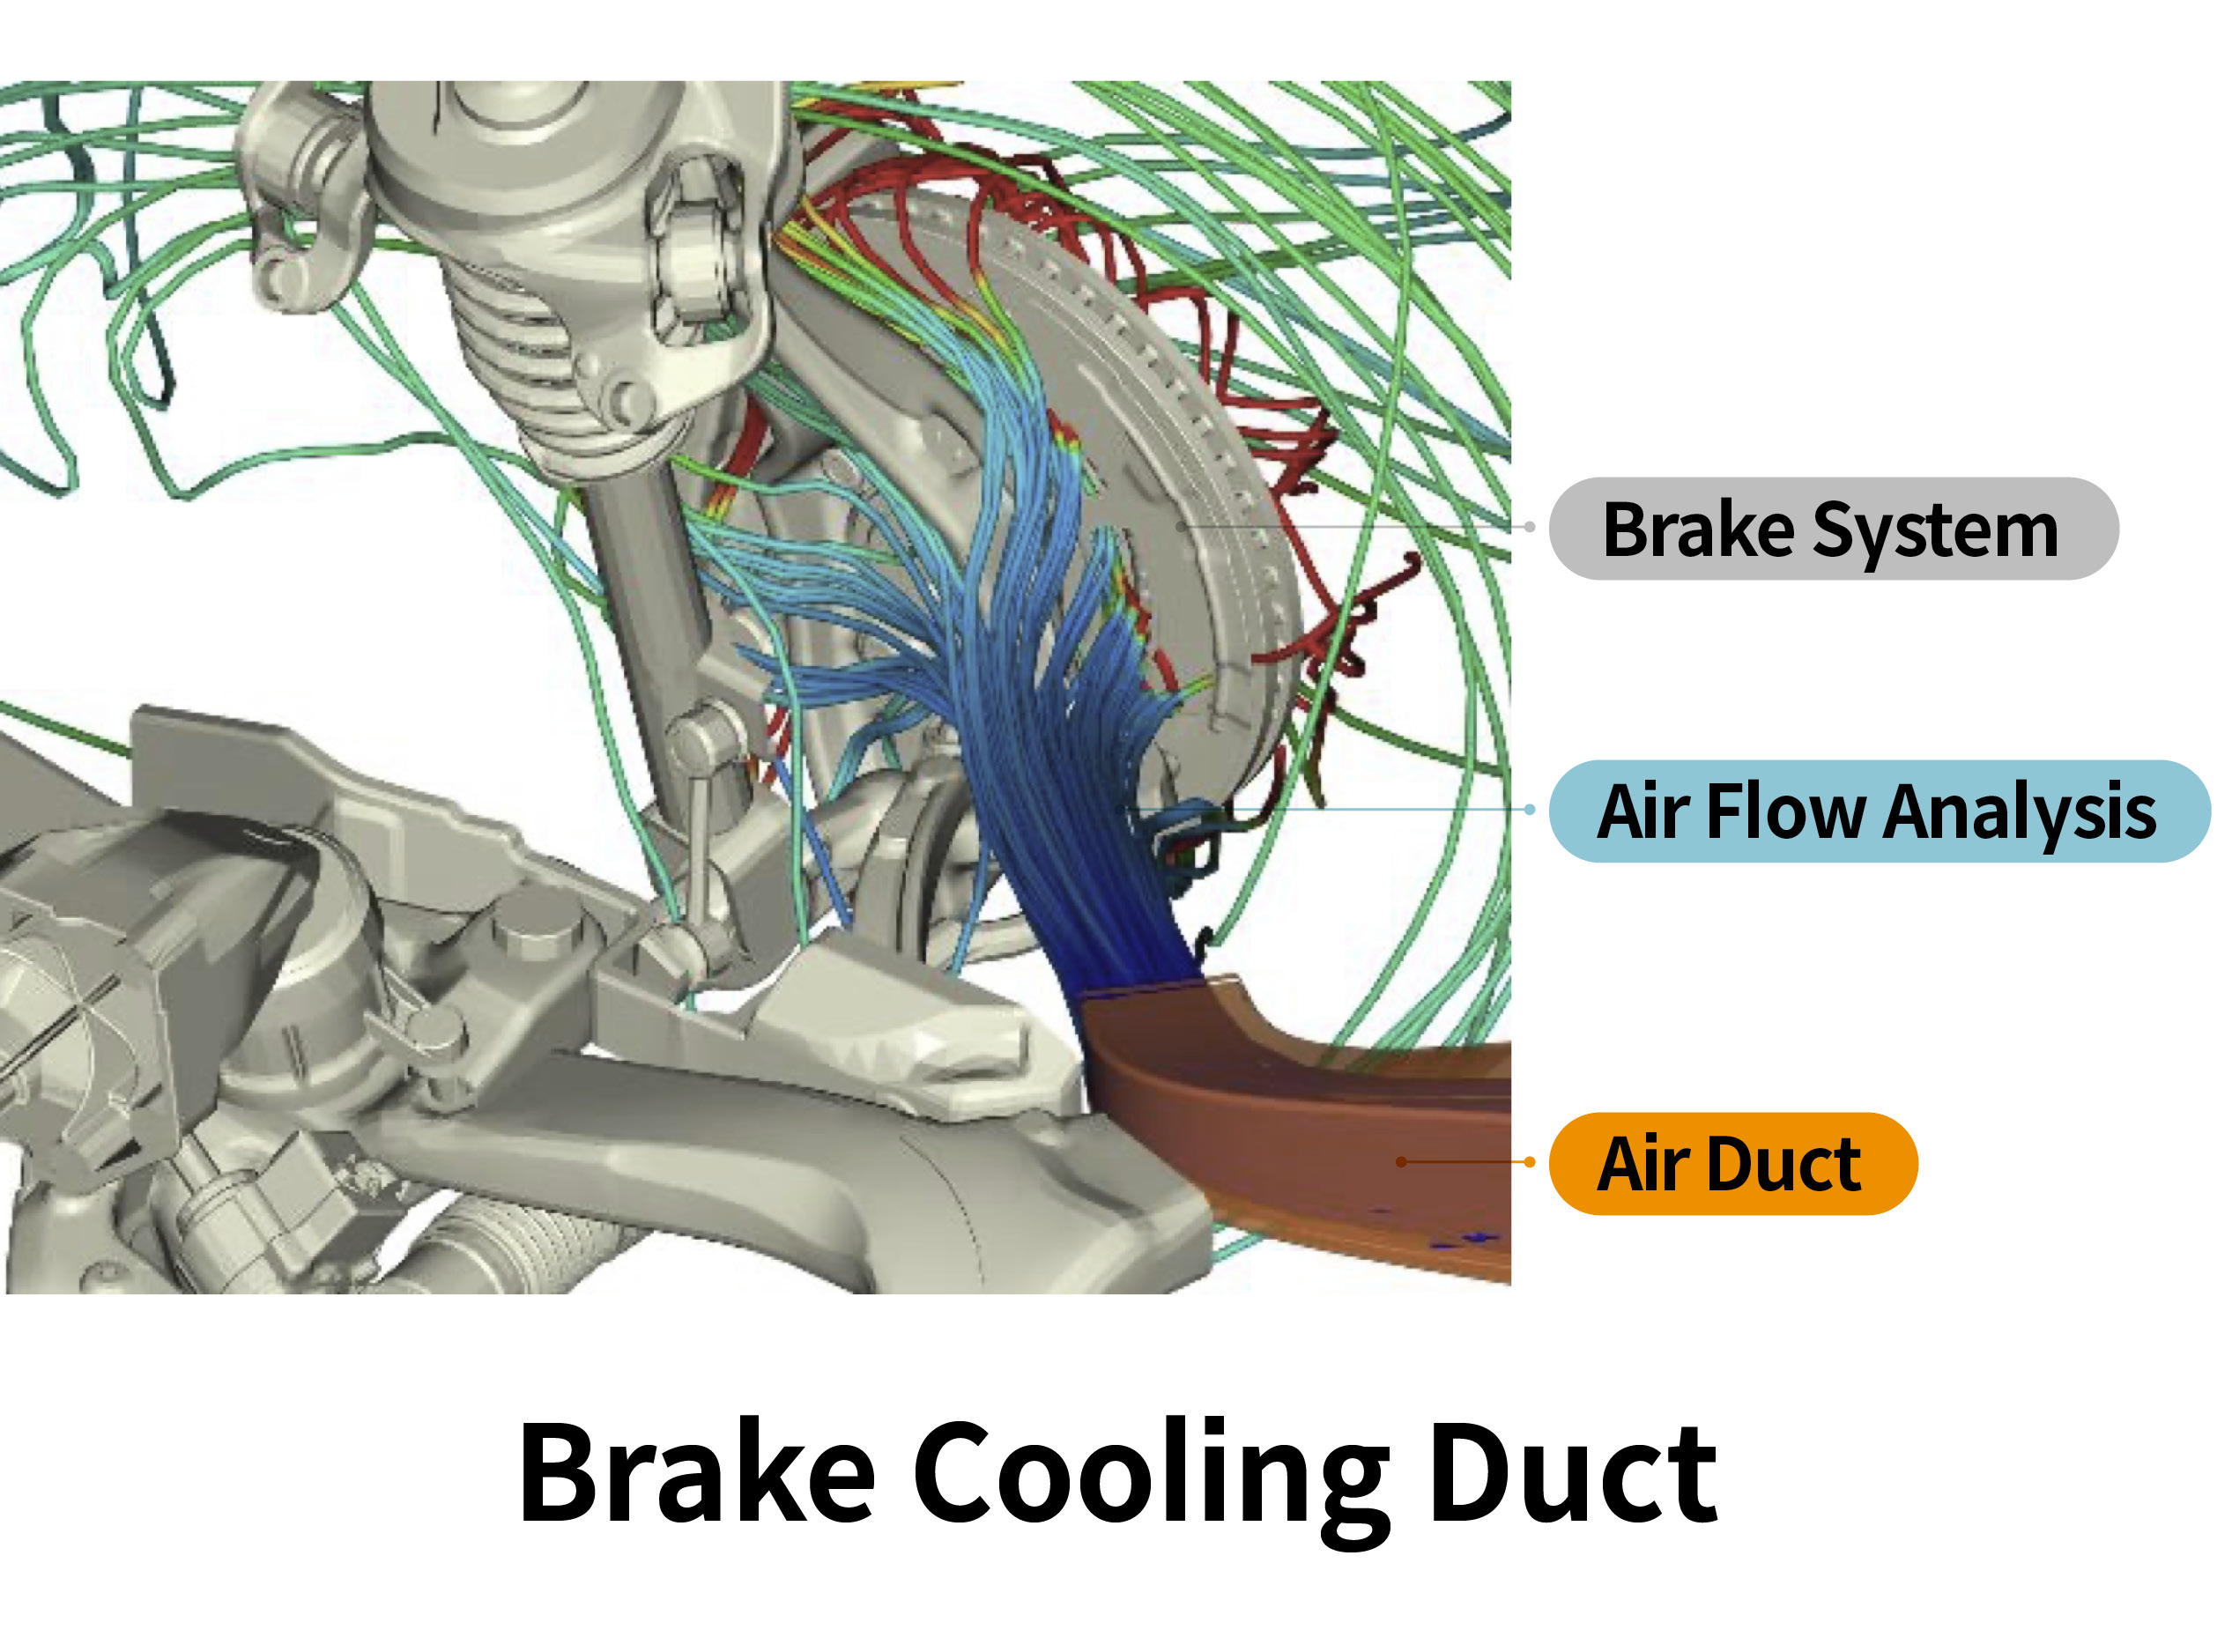 3D image of brake cooling duct and air flow analysis